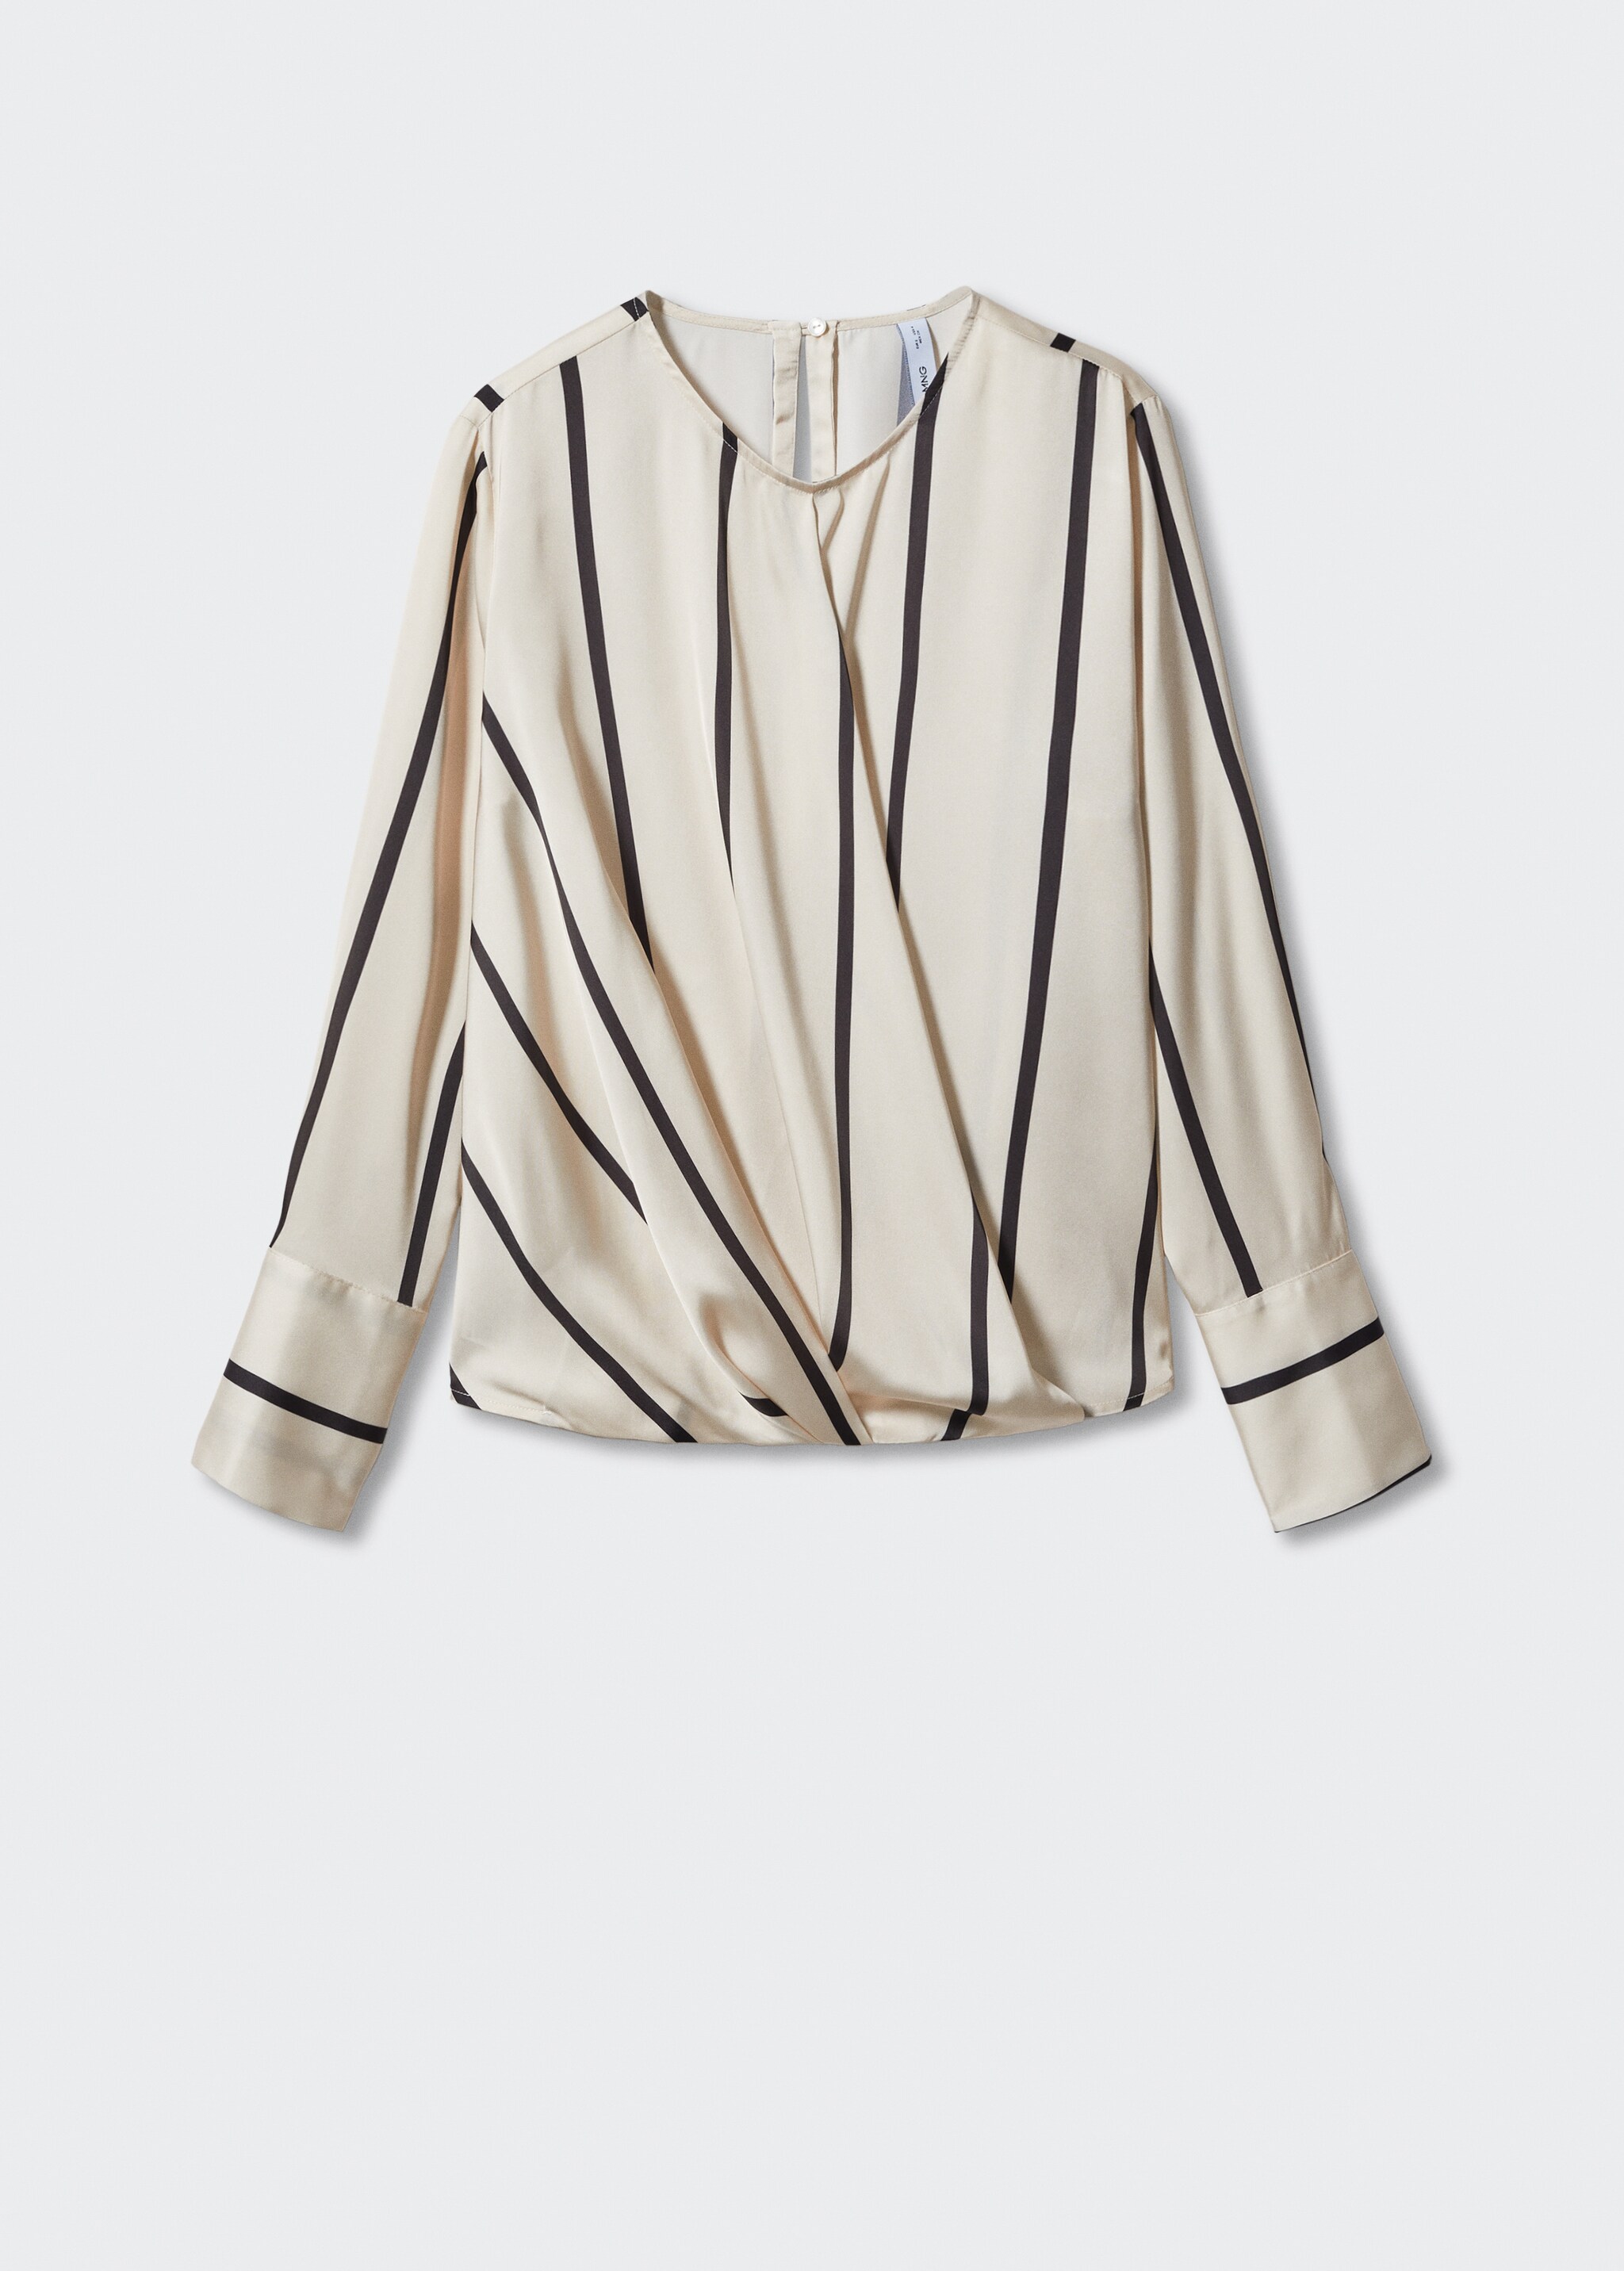 Striped satin blouse - Article without model